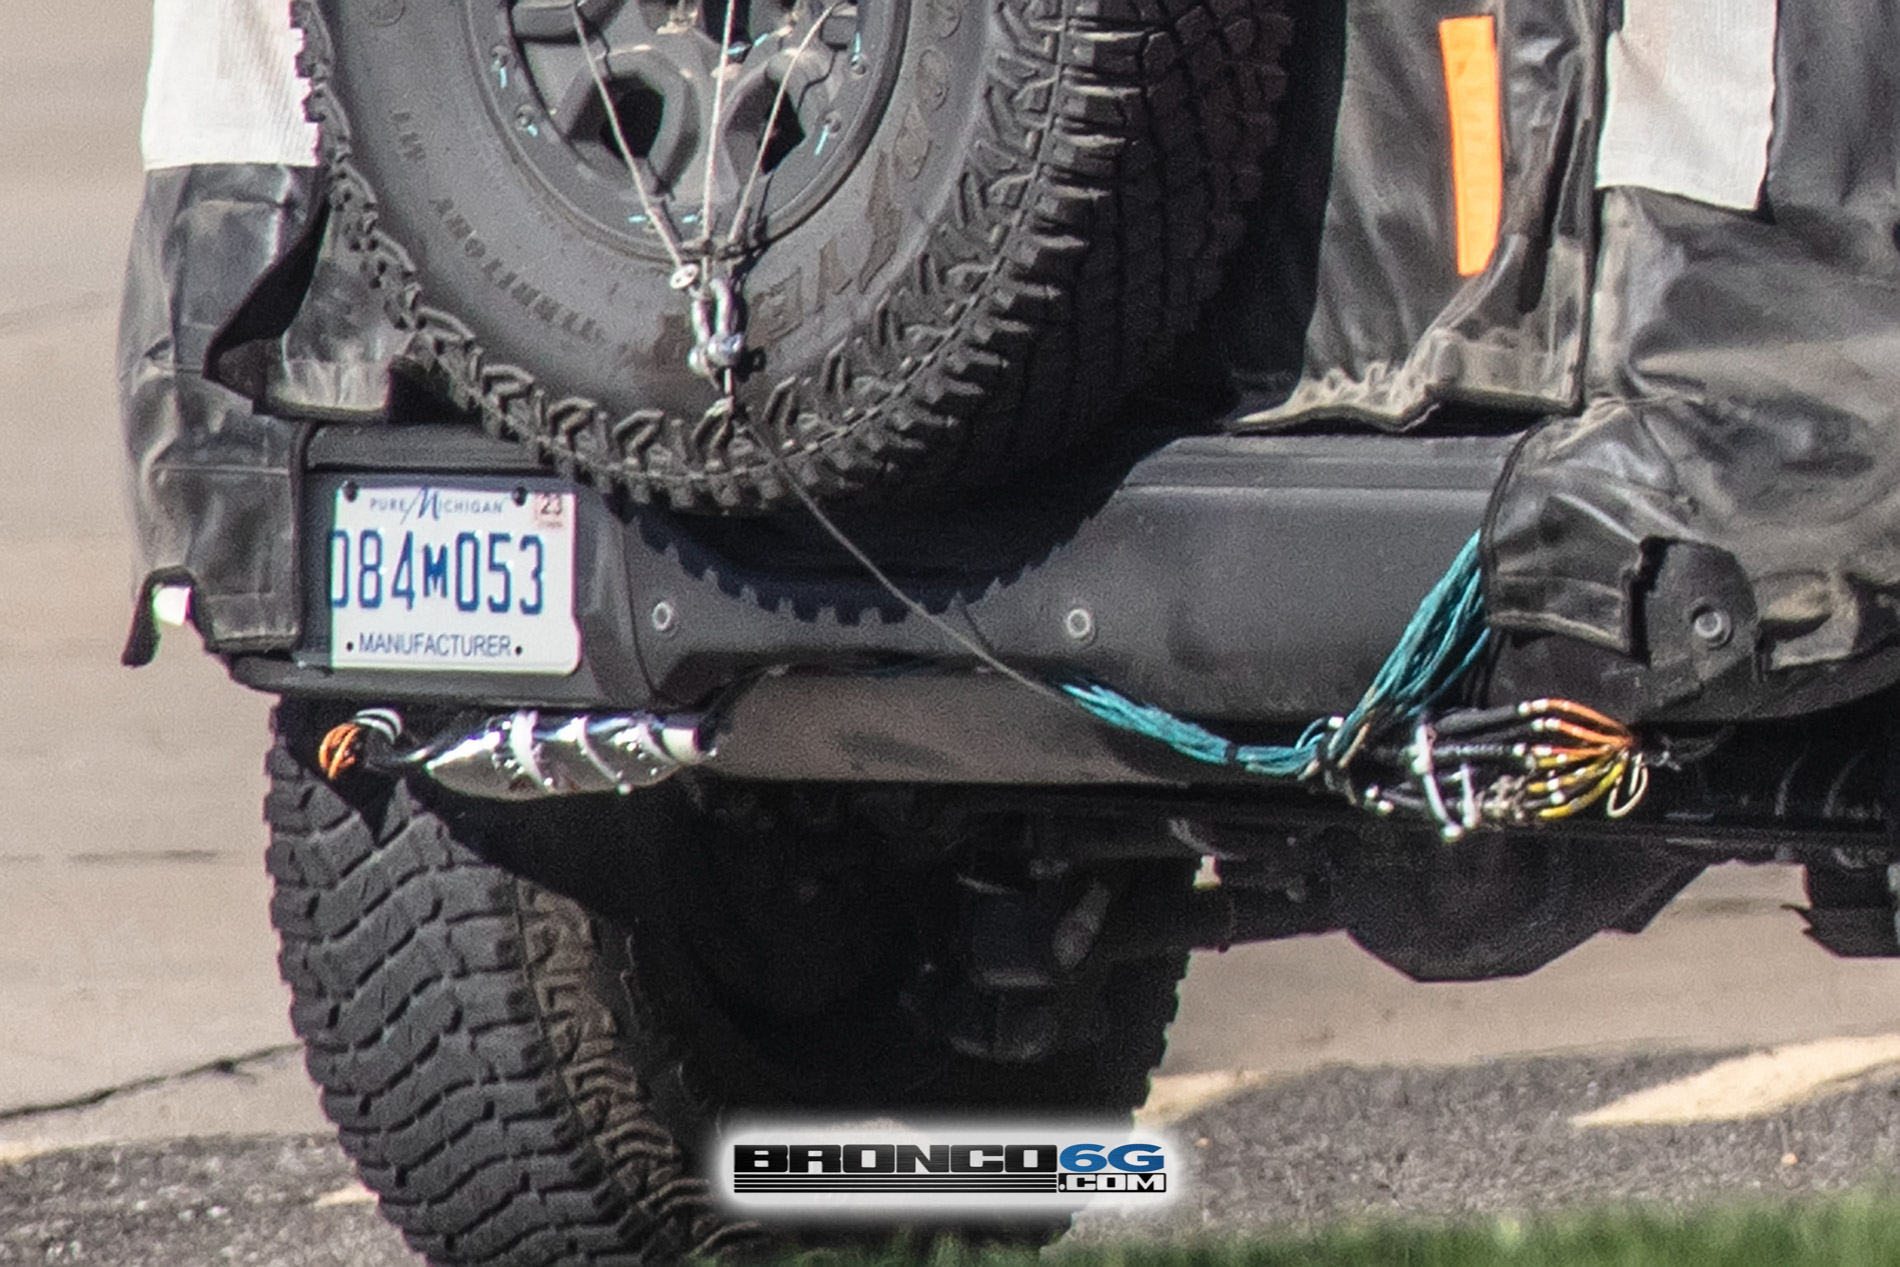 Ford Bronco 🕵🏻‍♂️ Spied! 2022 Bronco Everglades Showing Winch, Snorkel, Roof Rack 8C25739E-EDF5-4DBA-B3FF-A5AA06F9D6F3